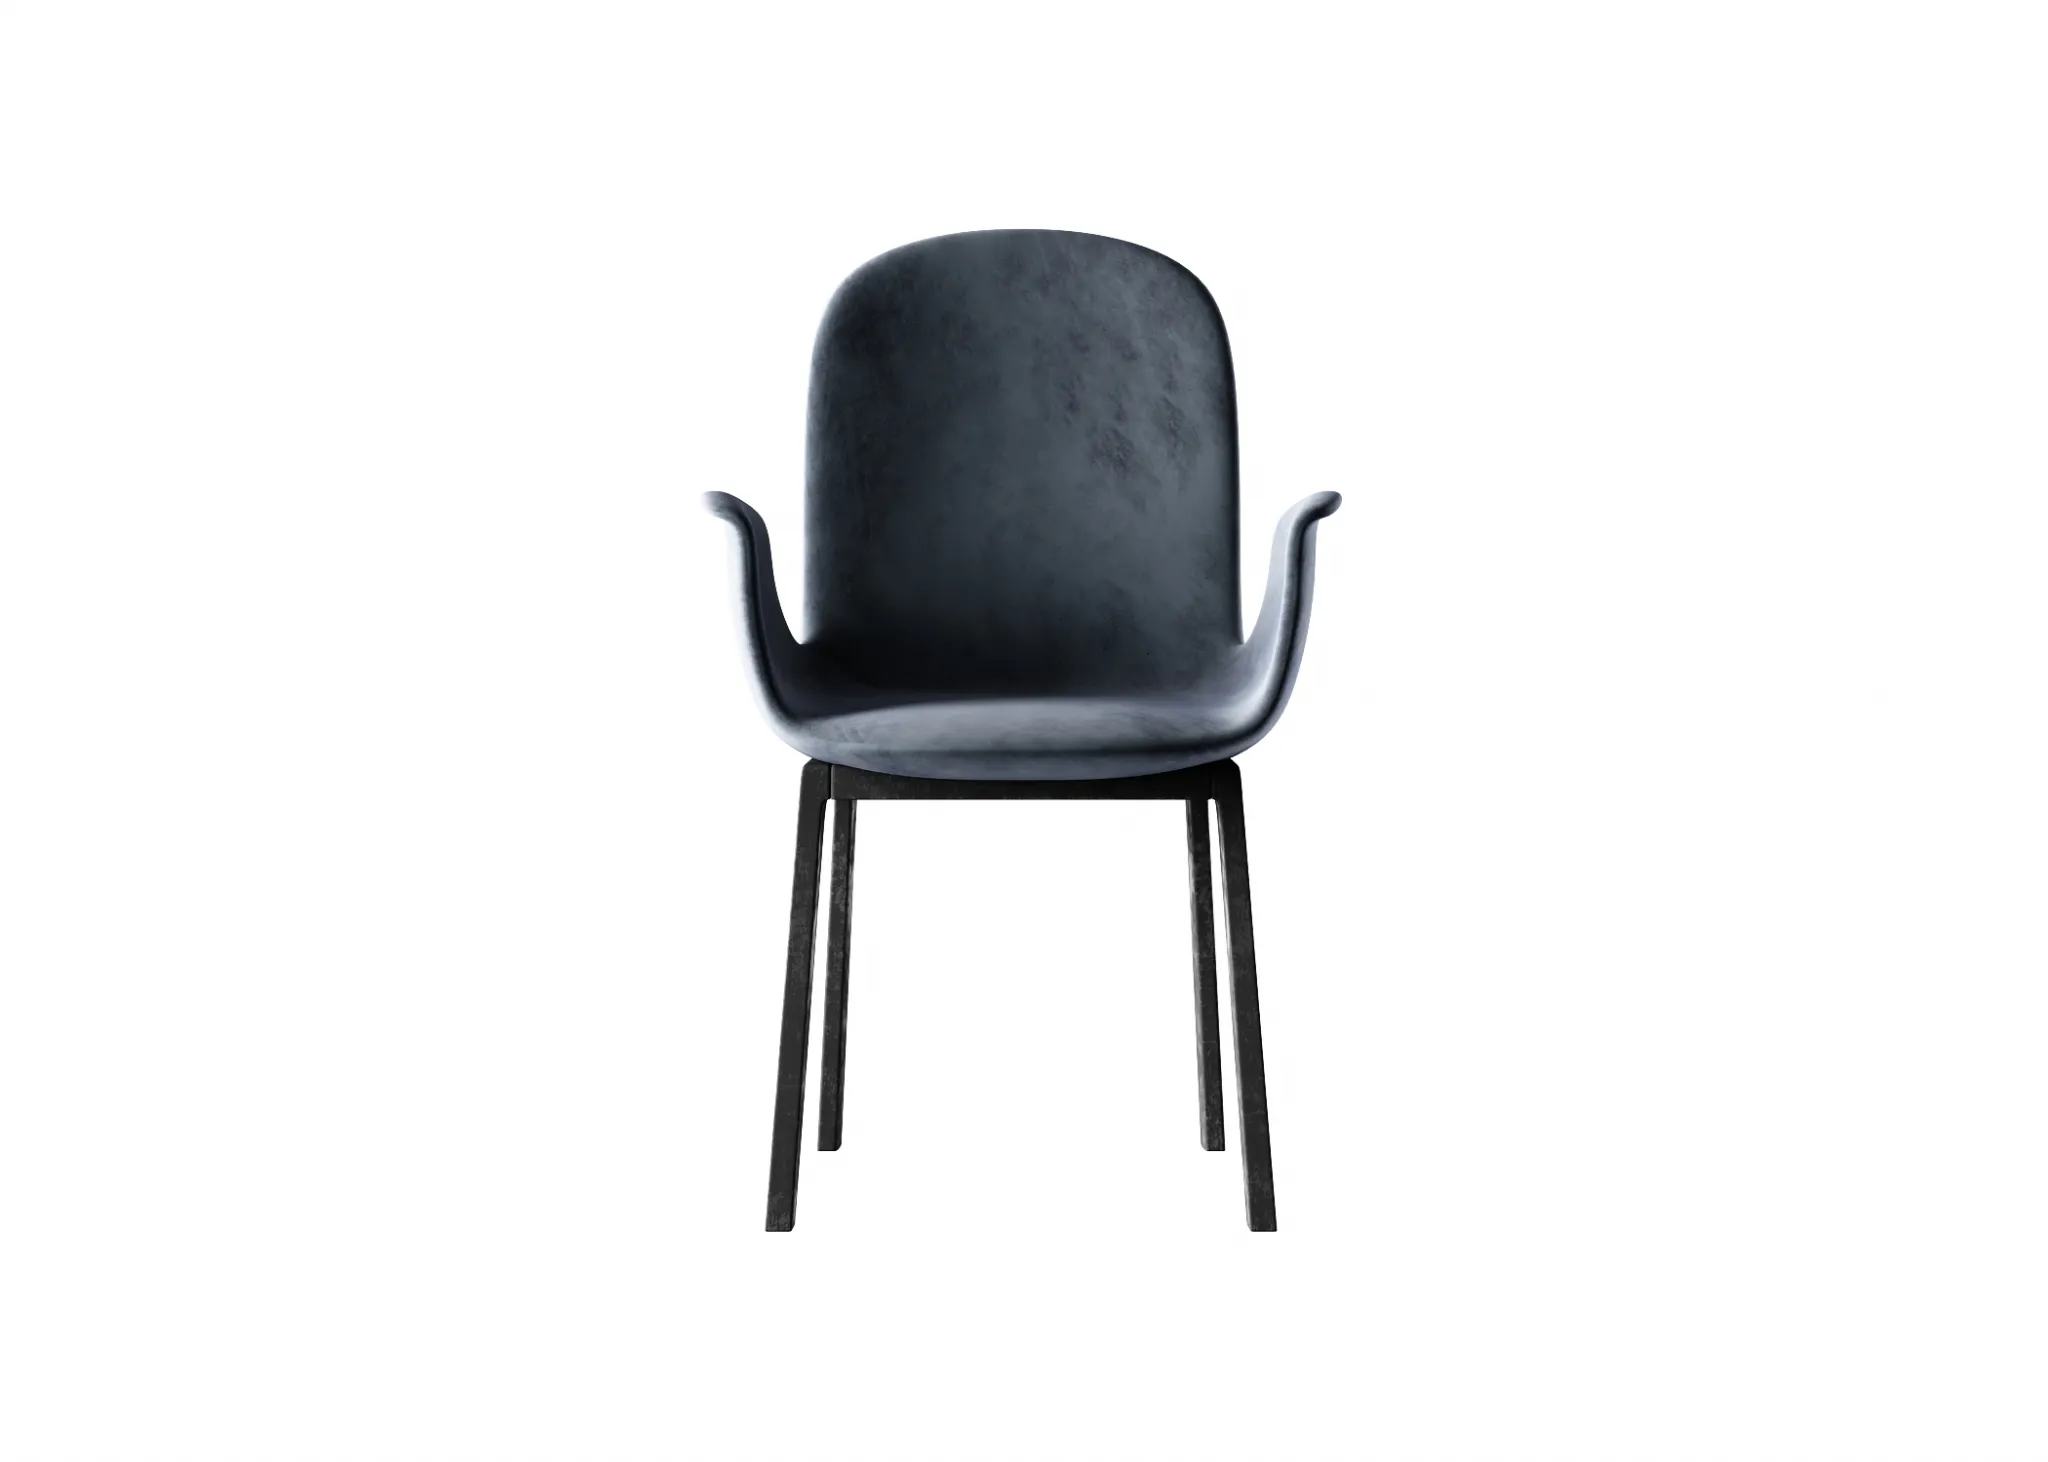 FURNITURE 3D MODELS – CHAIRS – 0486